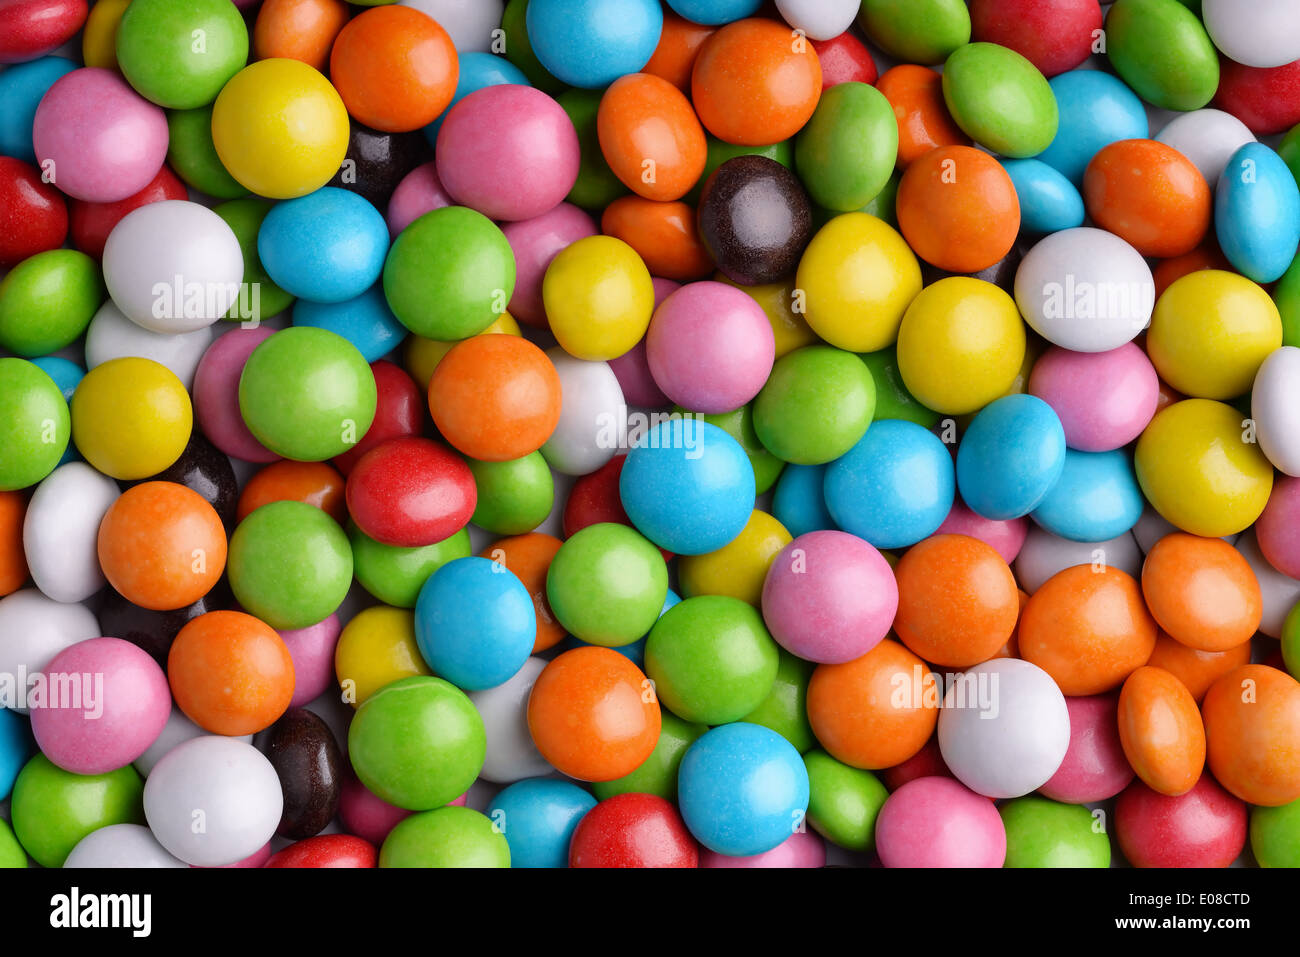 Background of colorful candy drops Stock Photo